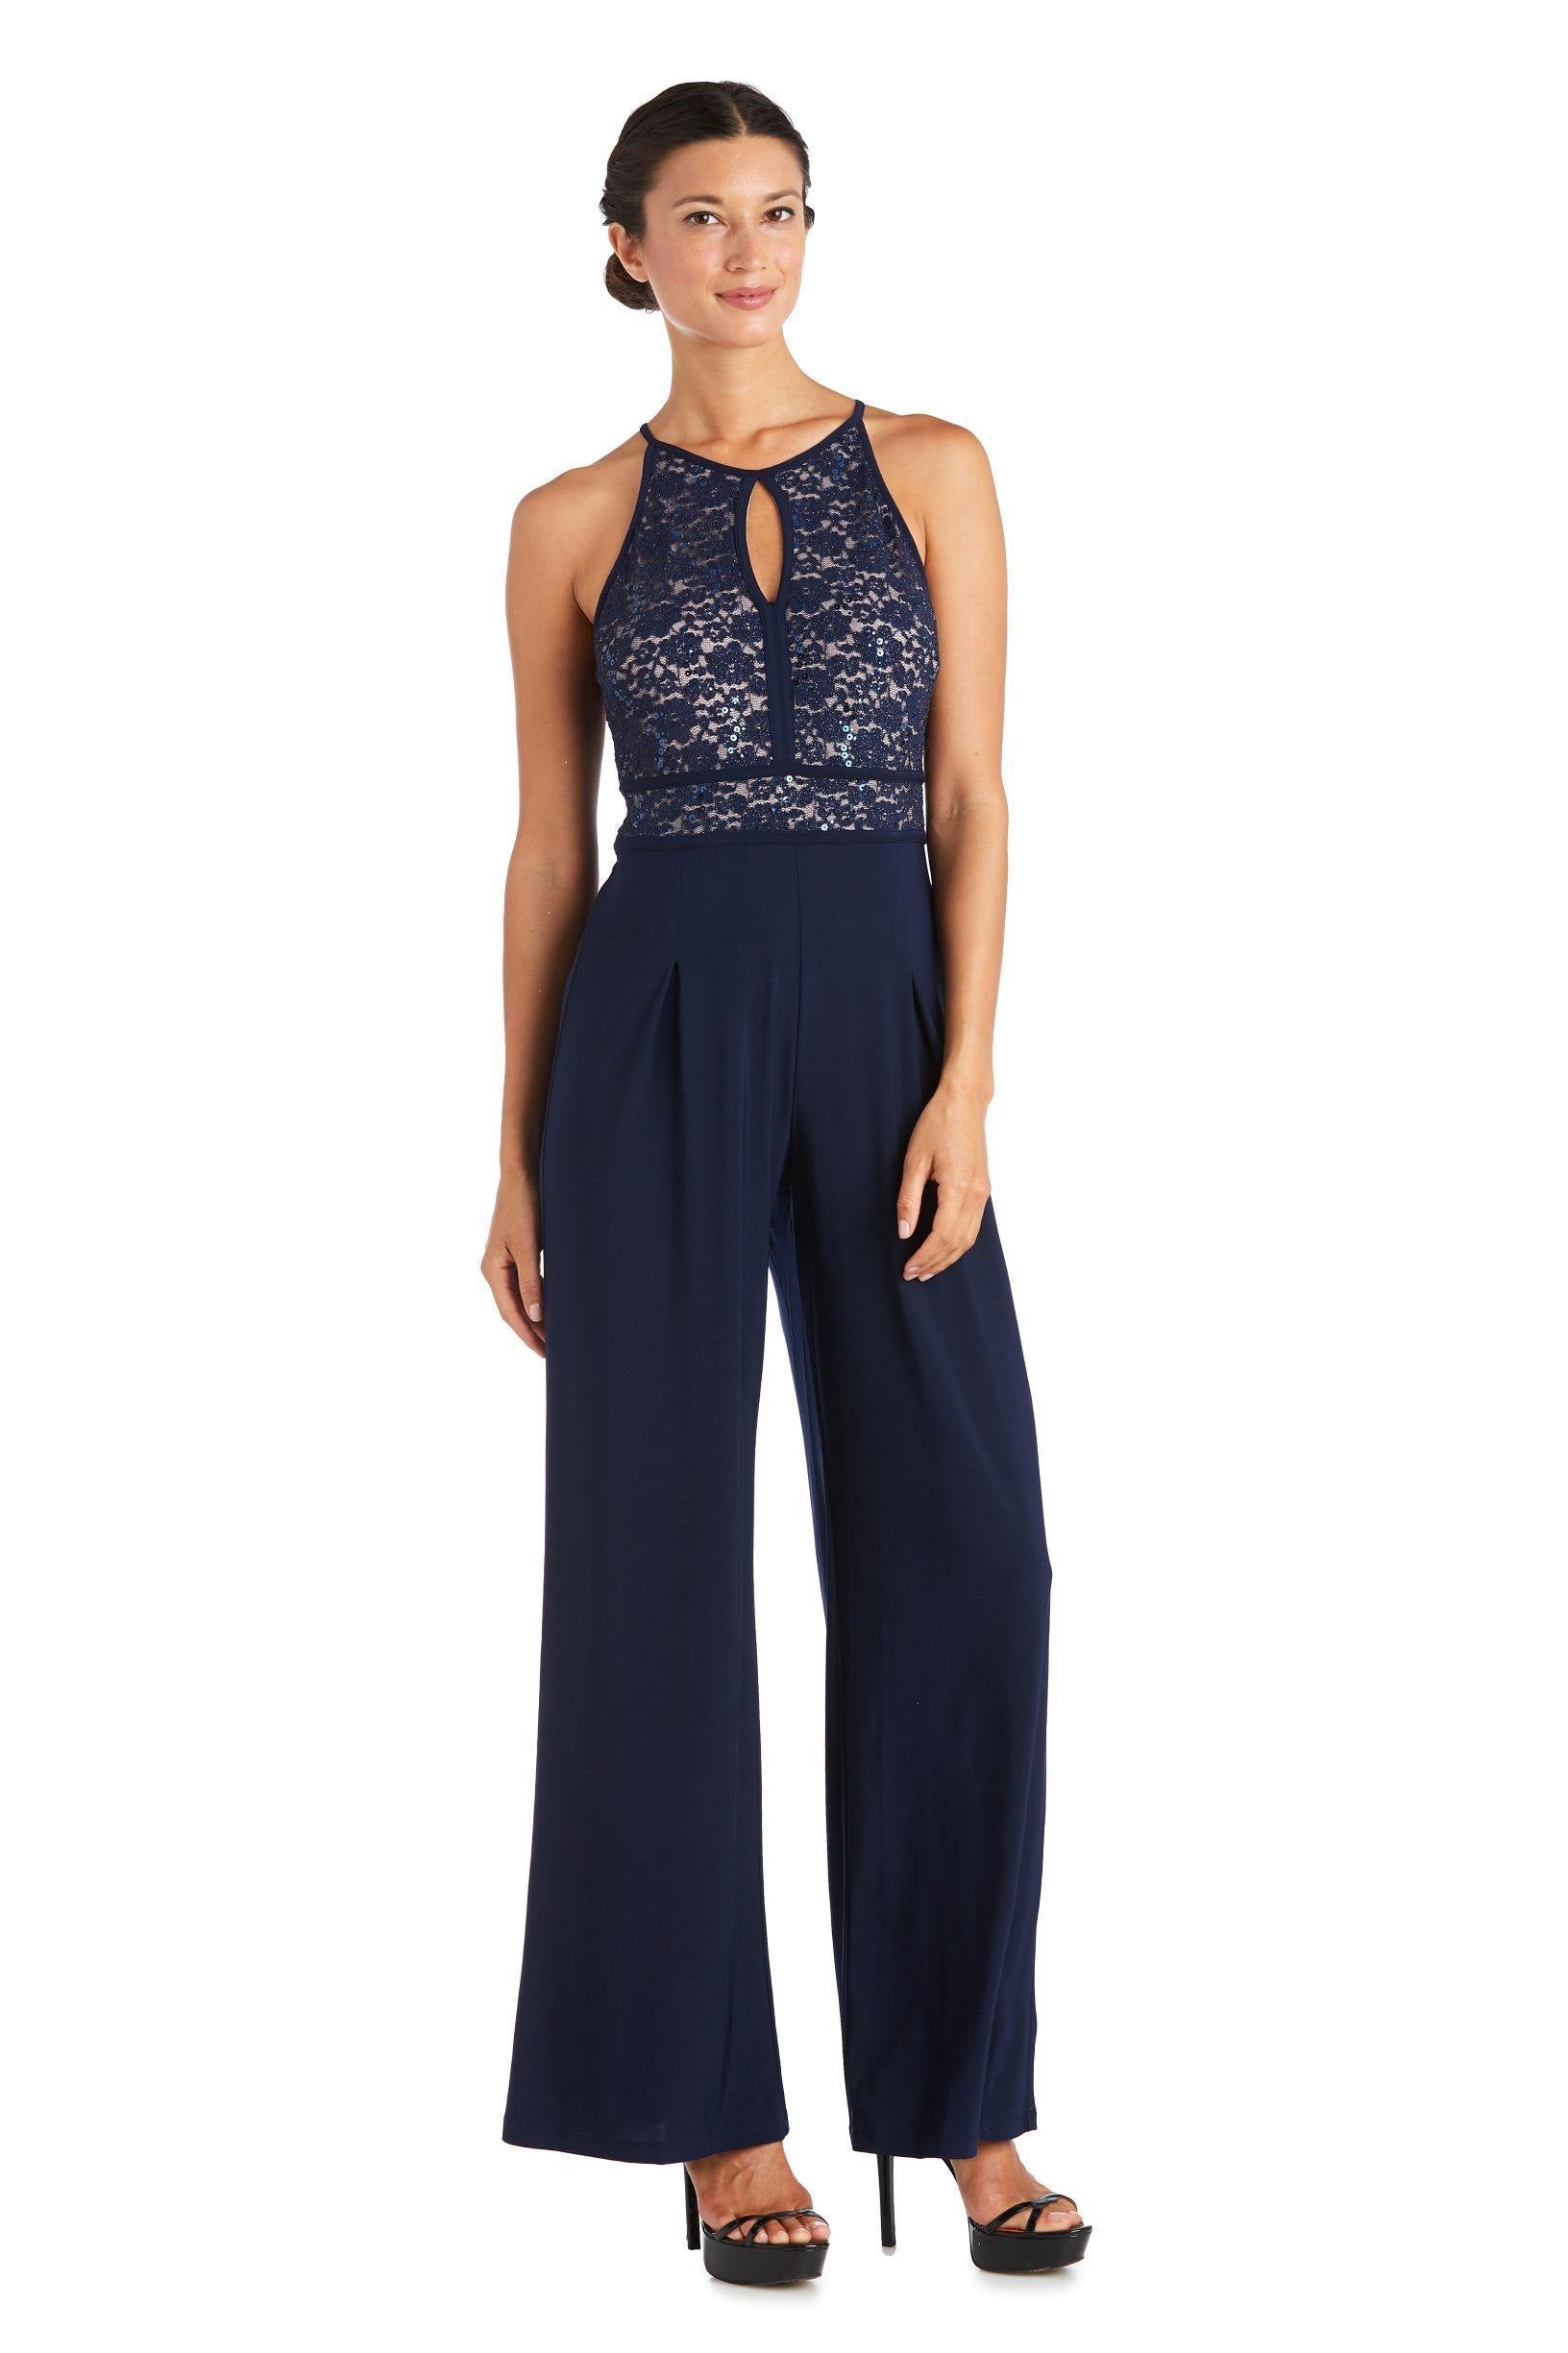 Nightway Lace Jumpsuit Formal 21508 | The Dress Outlet